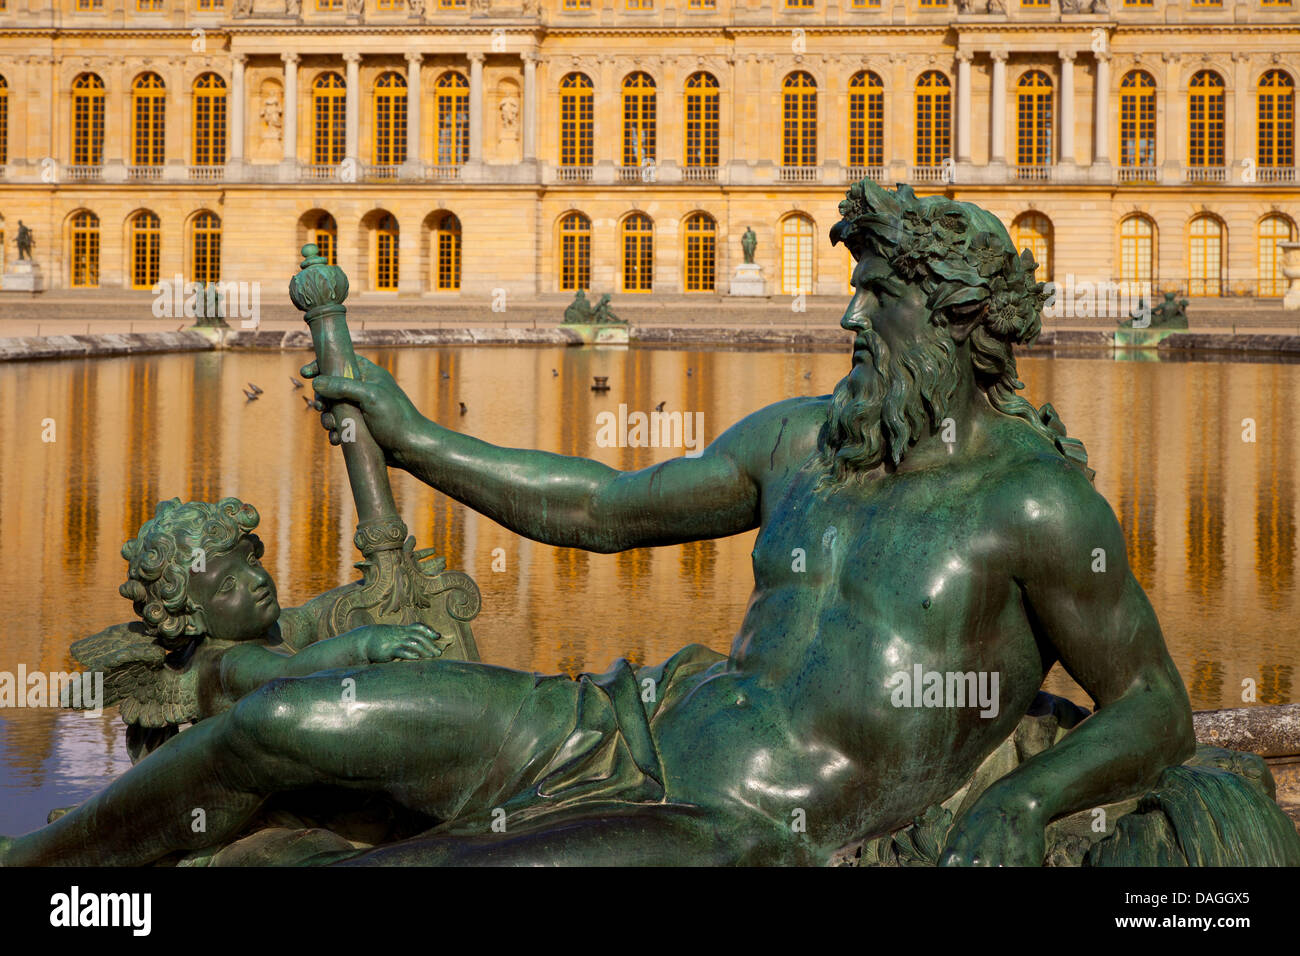 Reclining statue beside pool at Chateau de Versailles, France Stock Photo